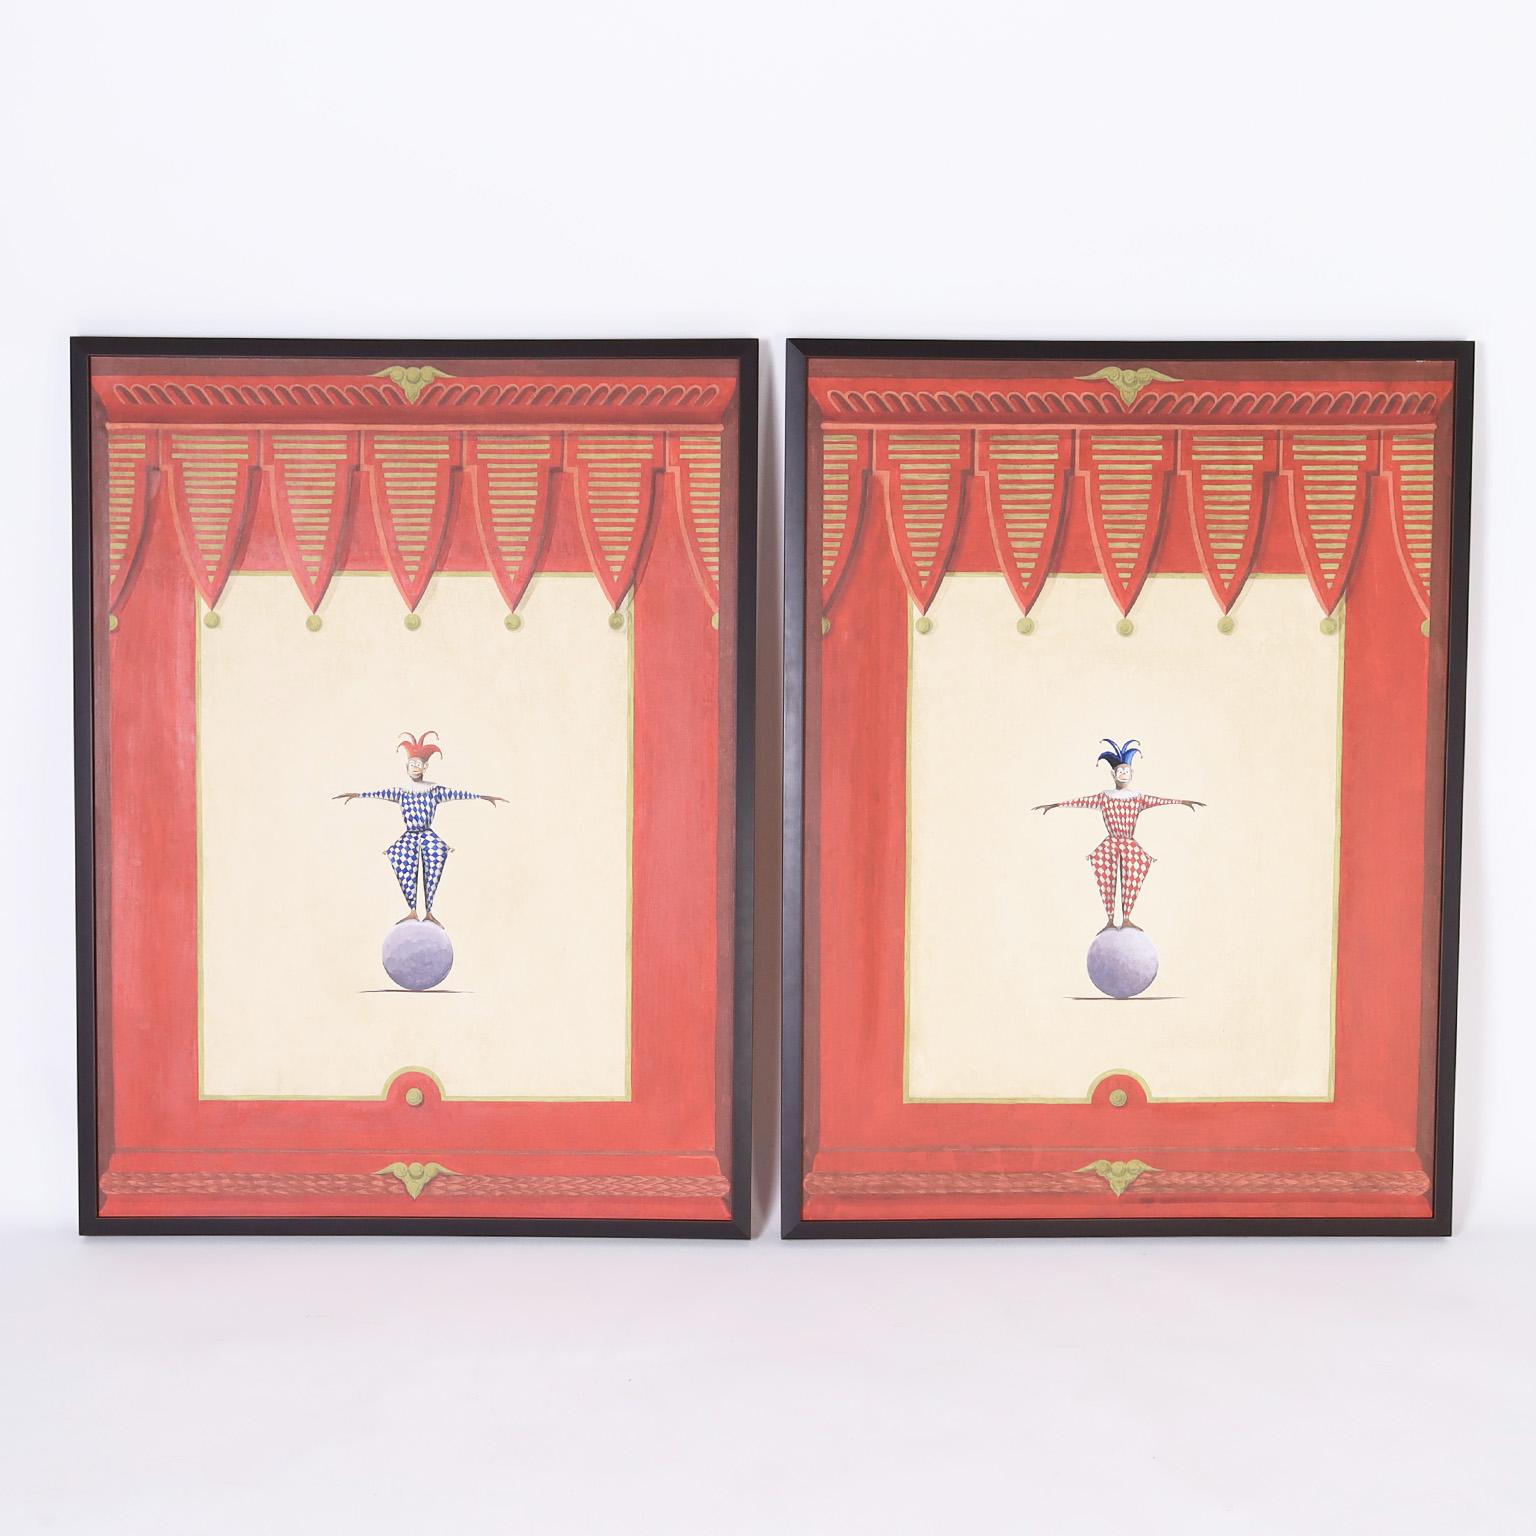 Unknown Figurative Painting - Pair of Whimsical Monkey Paintings by Vitorio Splendore